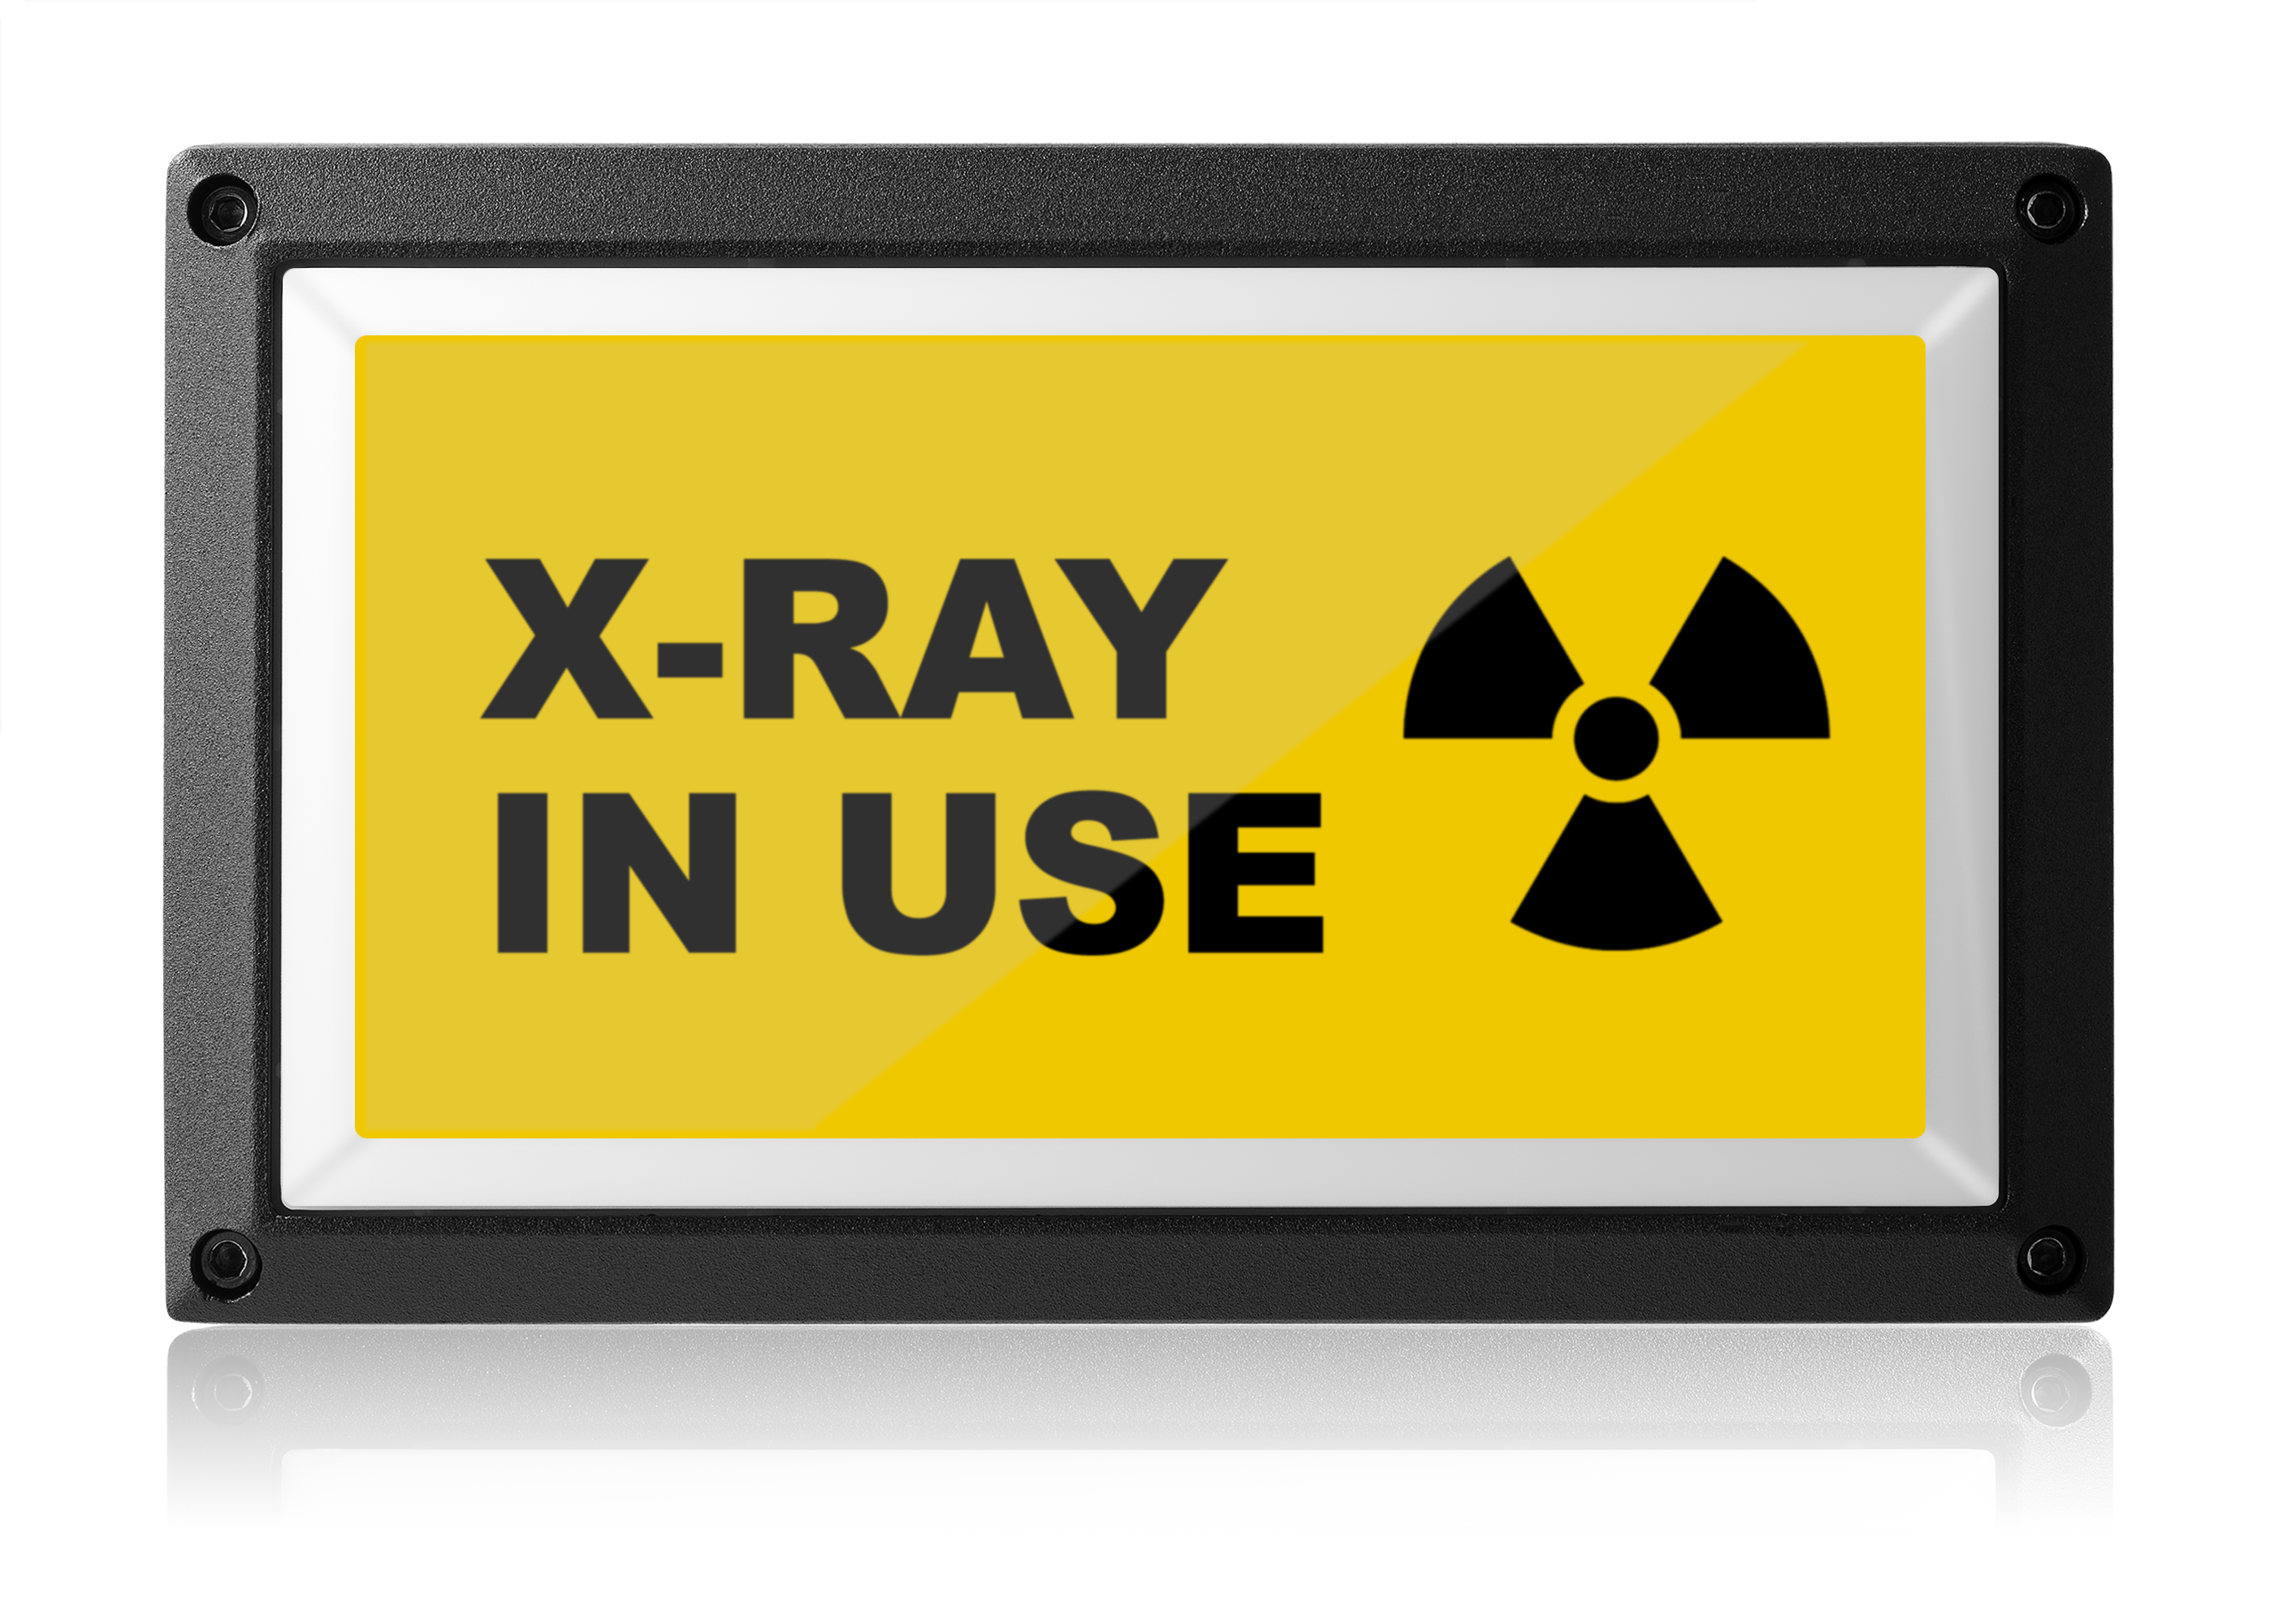 X-Ray In Use Light - Yellow ISO - Rekall Dynamics LED Sign-Red-Low Voltage (12-24v DC)-